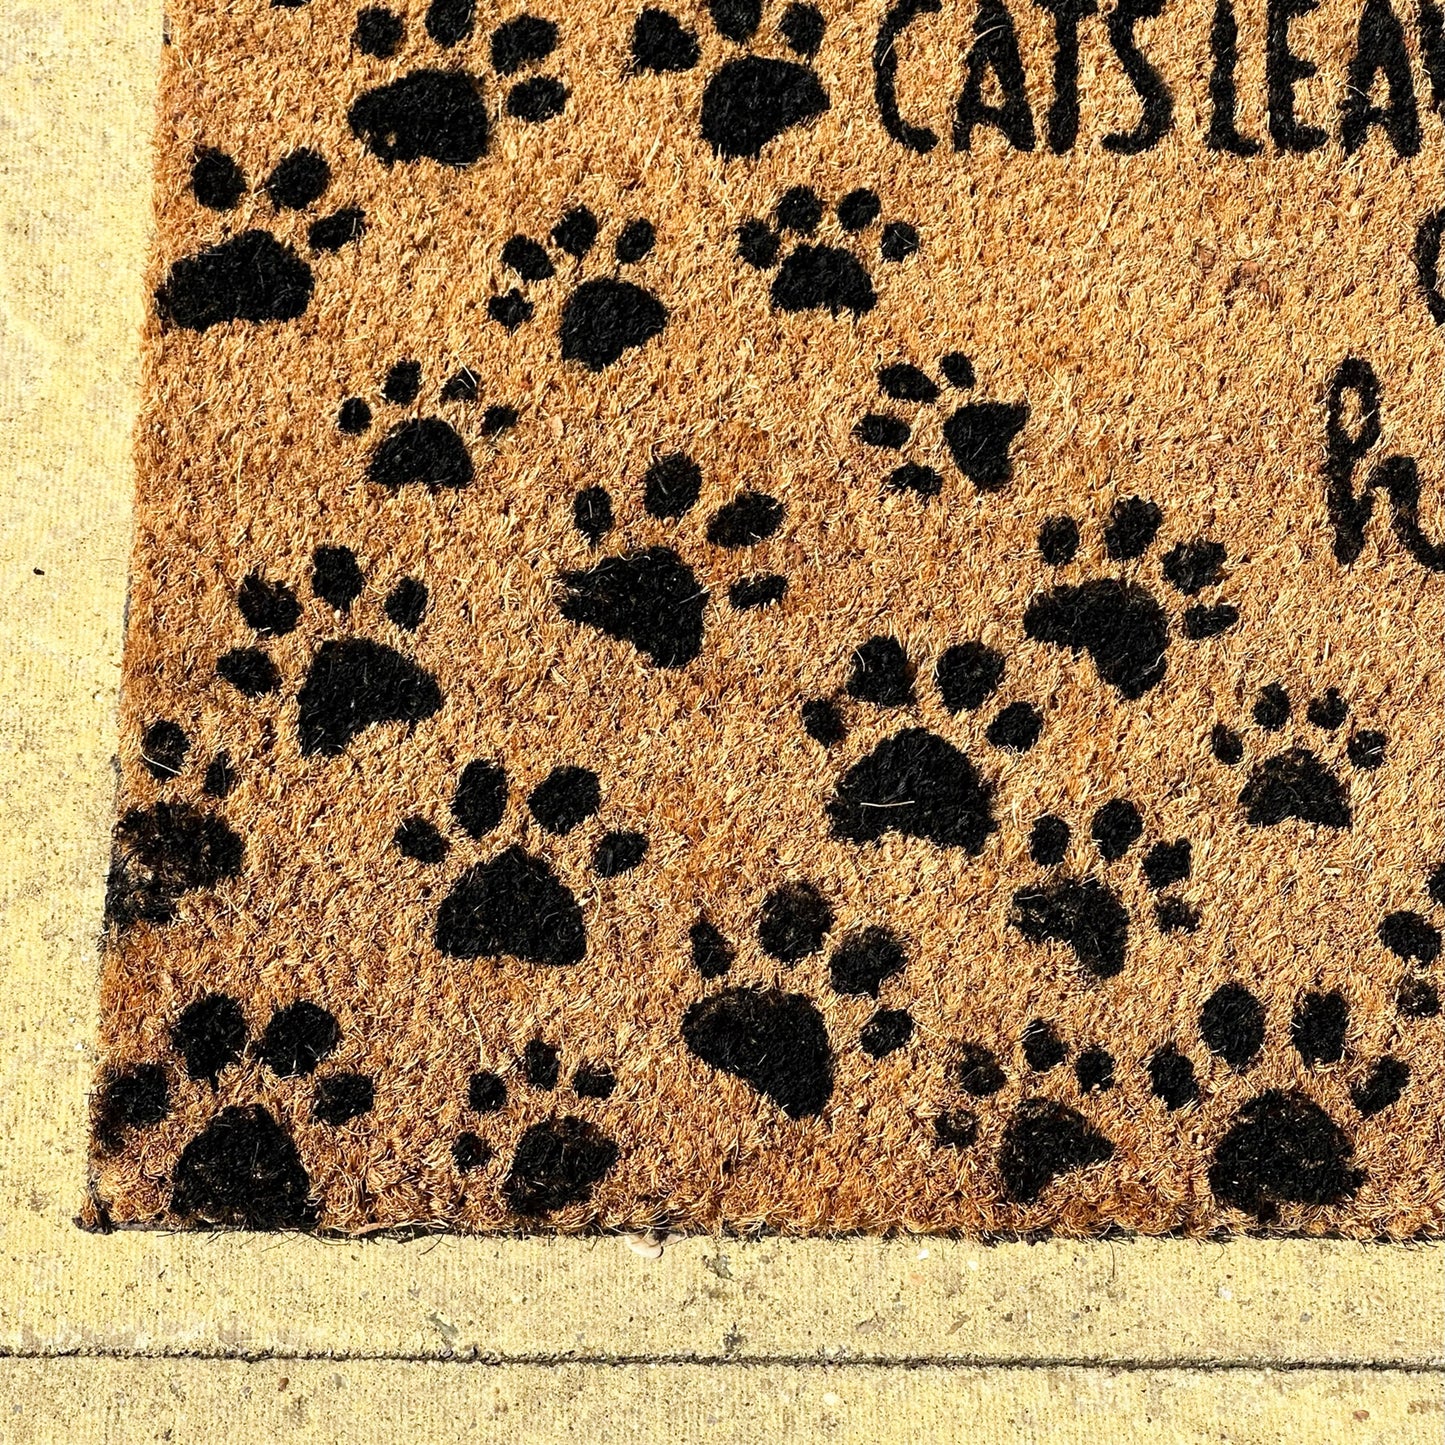 Cats Leave Paw Prints On Your Hearts Coir Doormat